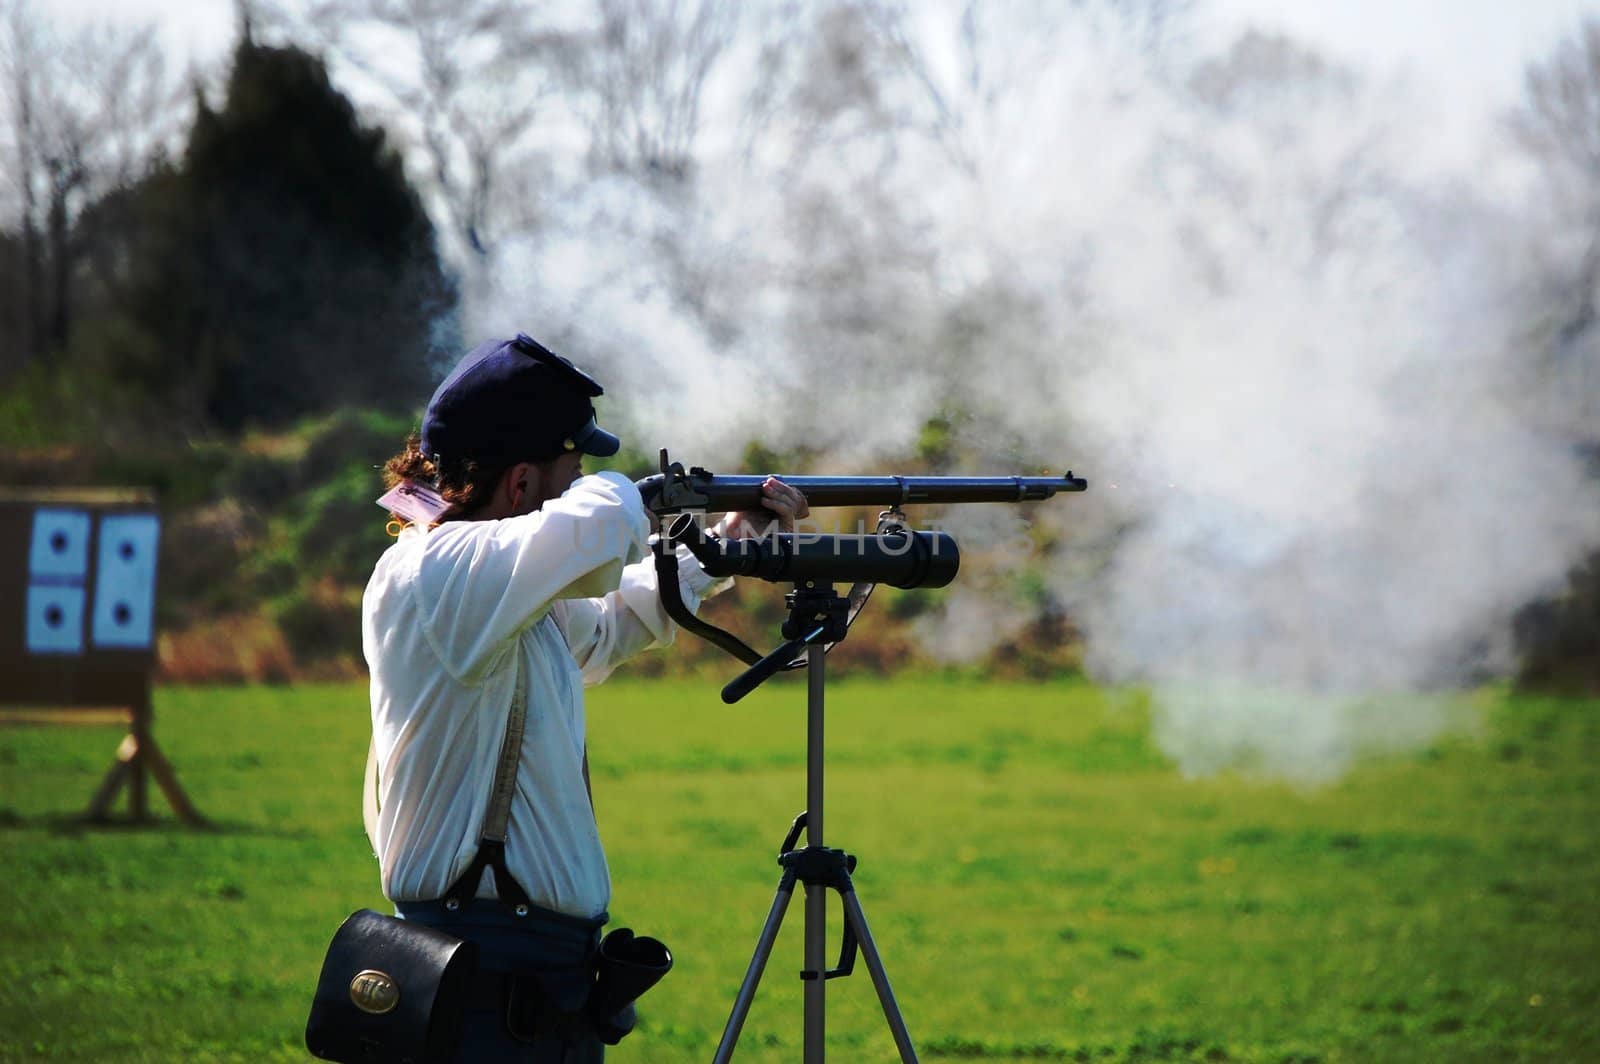 Man shoots musket by RefocusPhoto